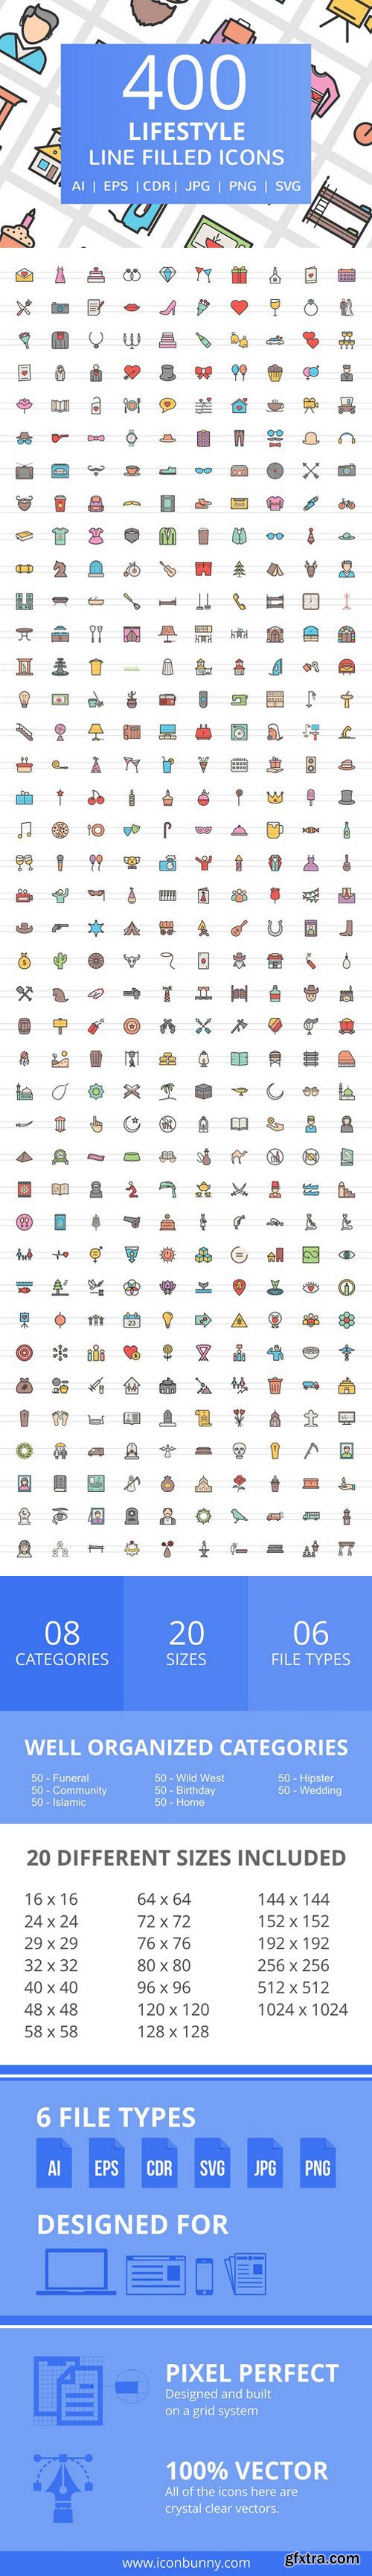 CM - 400 Lifestyle Filled Line Icons 2356921